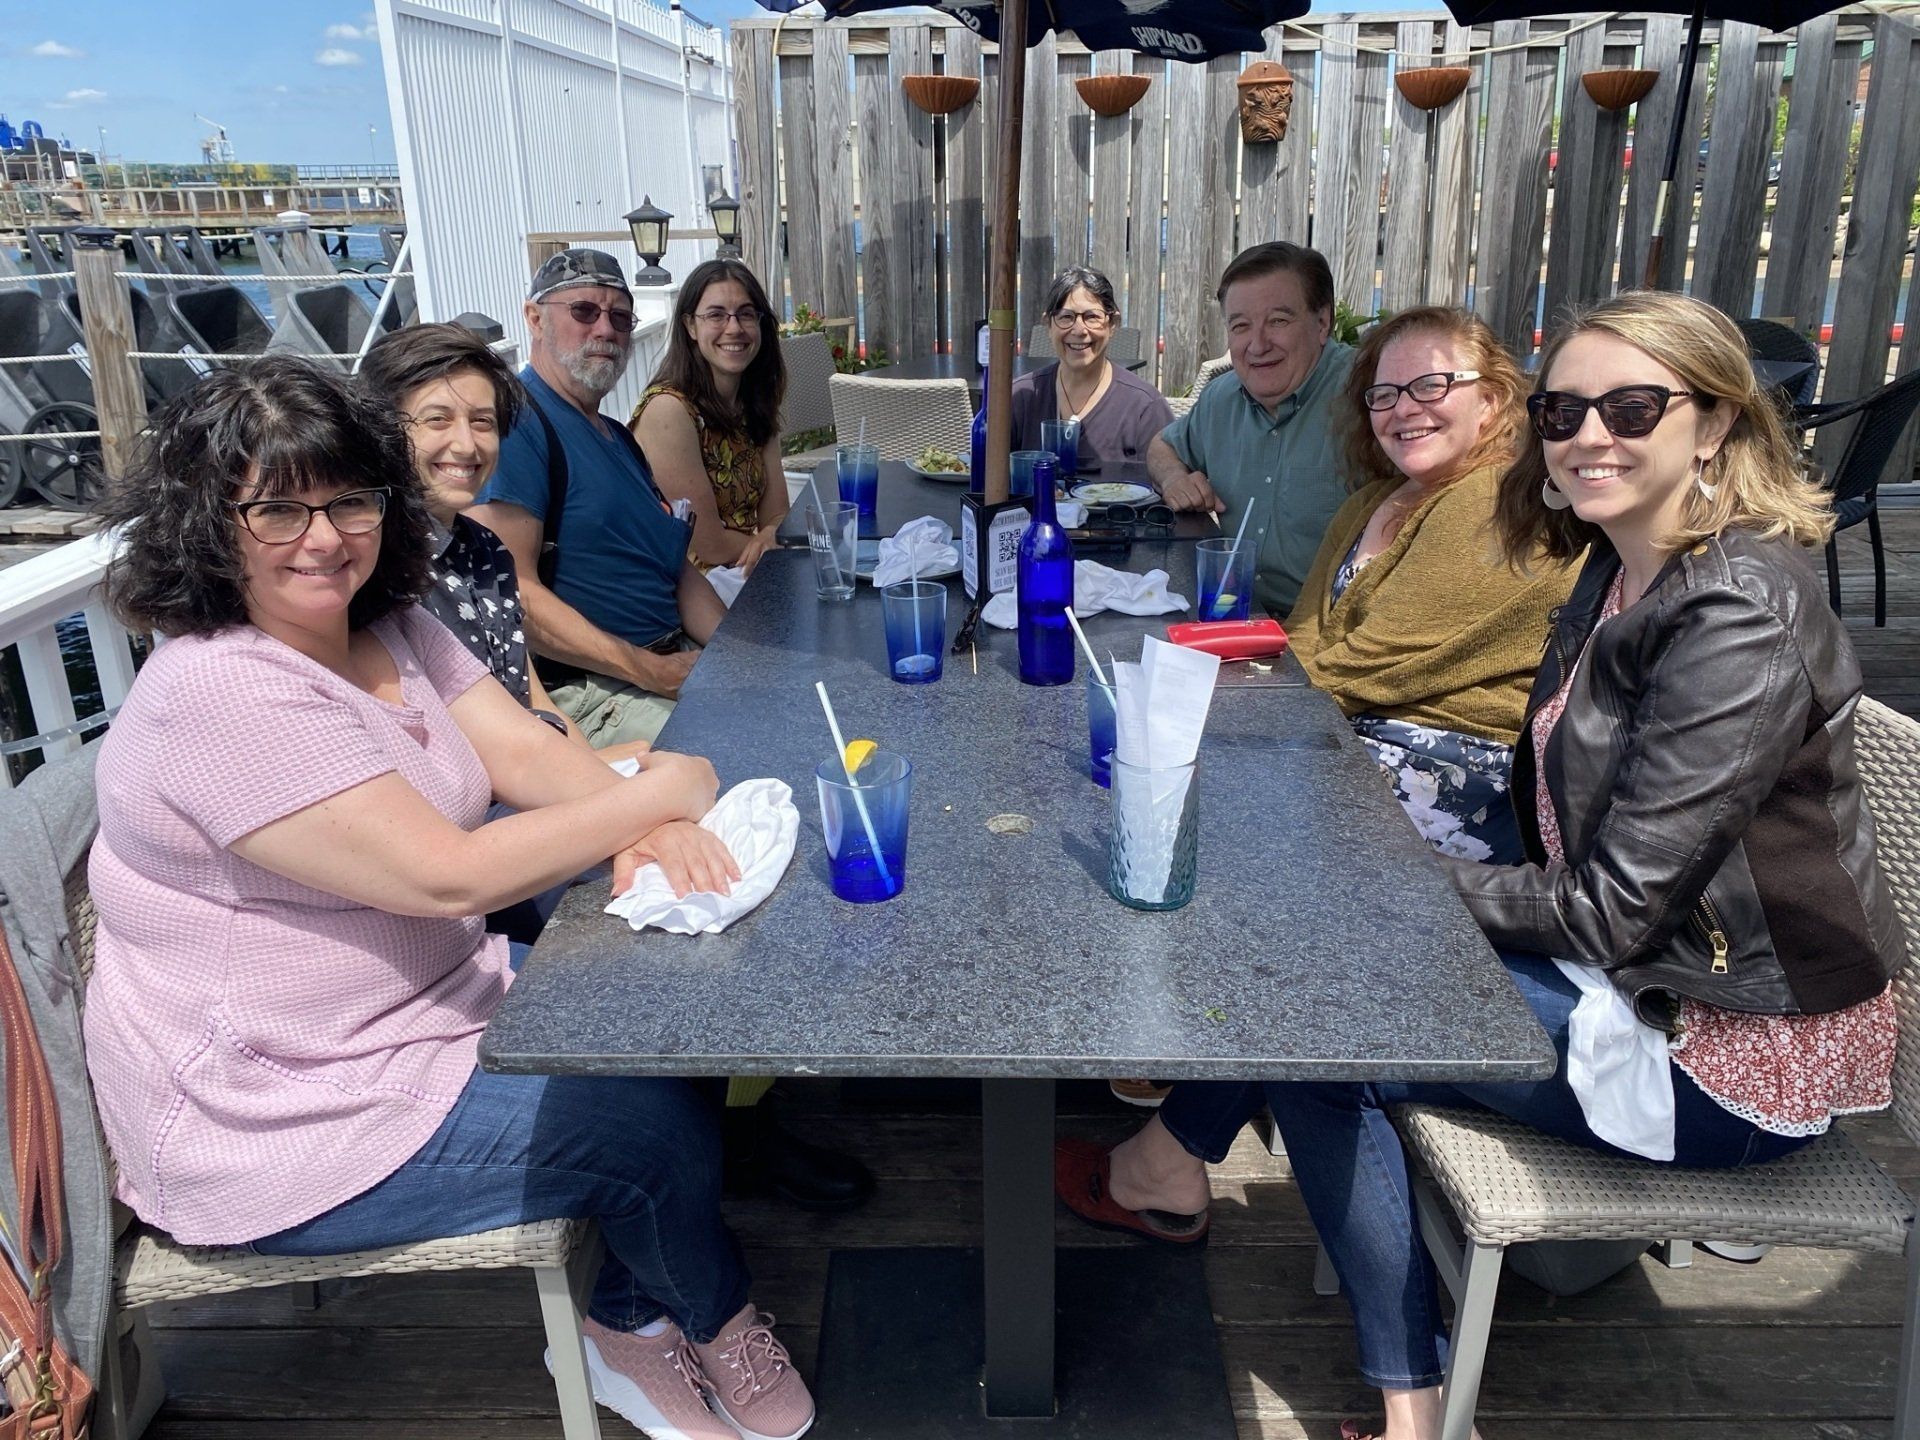 A group shot of TBE's eight staff members out at lunch - Sherri (a white woman with shoulder length dark hair and glasses); Zoe (a white person with short dark hair); Bob (a white man with a grey beard and sunglasses); Abby (a white woman with long brown hair and glasses); Rabbi Braun (a white woman with dark hair pulled back and glasses); Dave (a white man with short brown hair); Deb (a white woman with long red hair and glasses); and Kate (a white woman with blonde shoulder length hair and sunglasses)